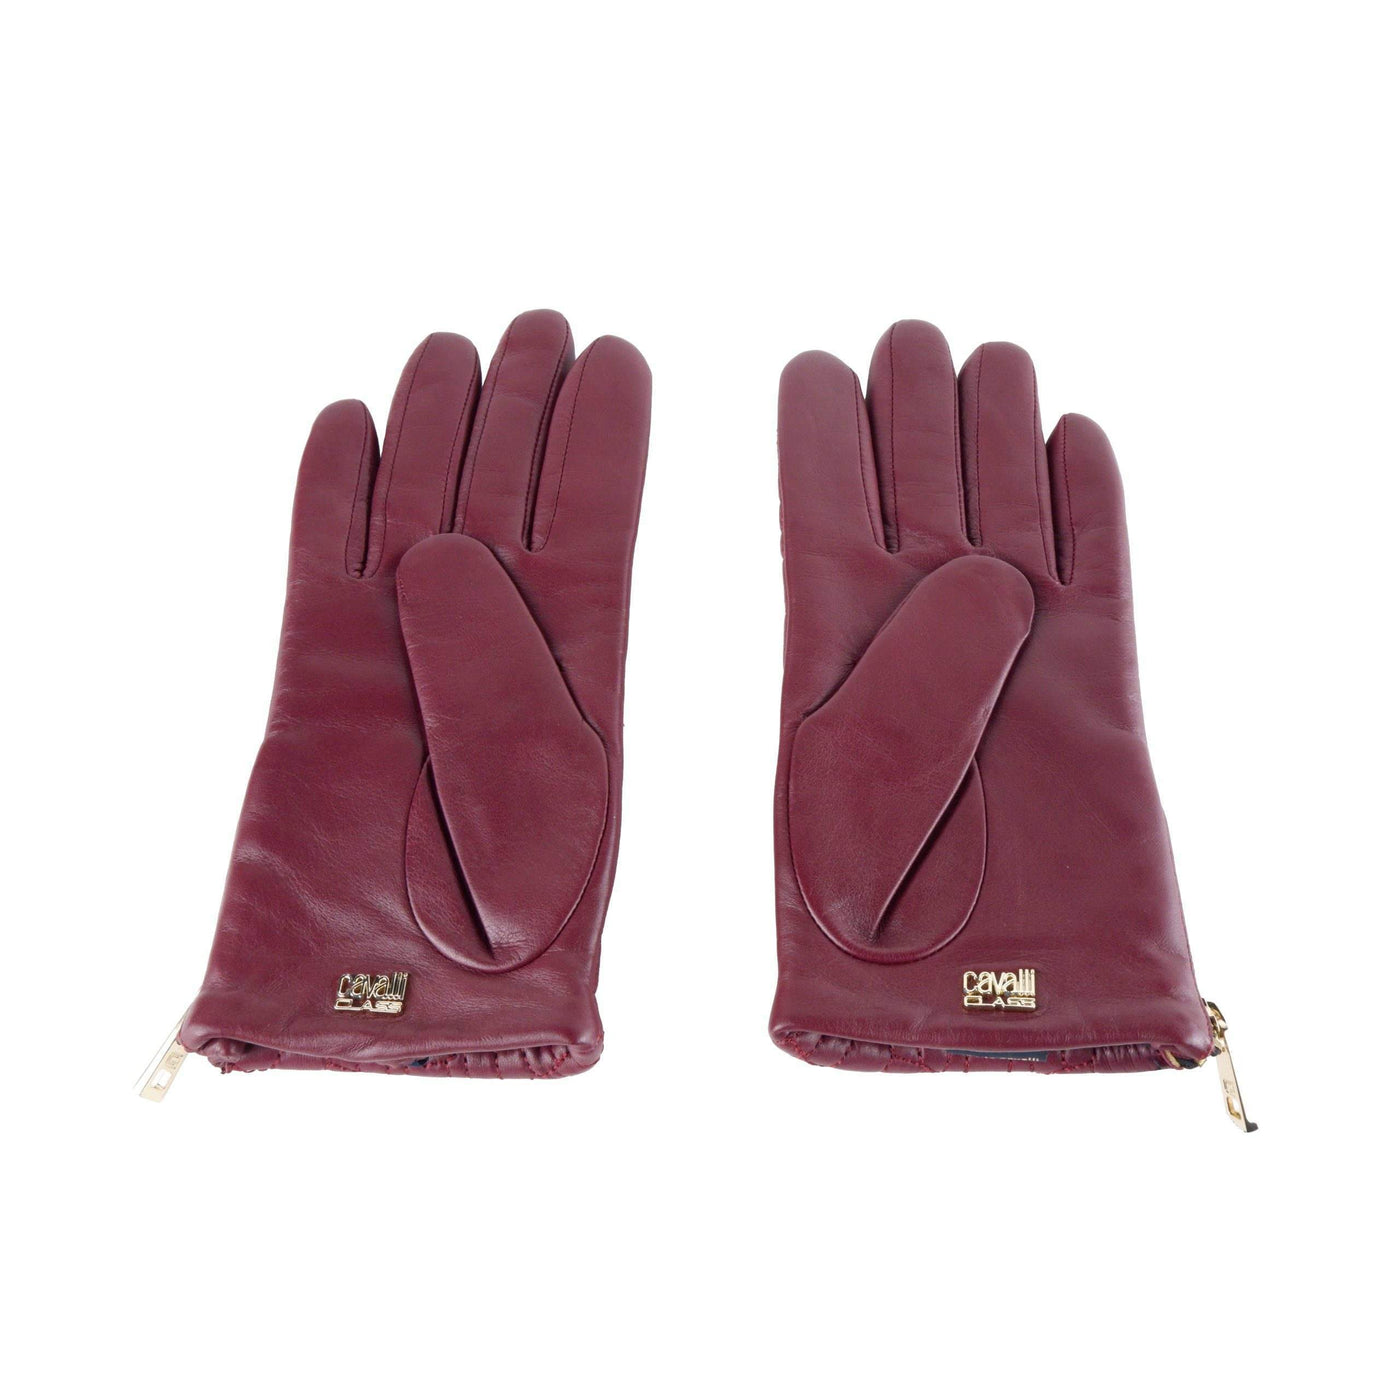 Cavalli Class Glove #women, 7|S, Cavalli Class, feed-agegroup-adult, feed-color-red, feed-gender-female, feed-size-7|S, Gender_Women, Gloves - Women - Accessories, Red at SEYMAYKA